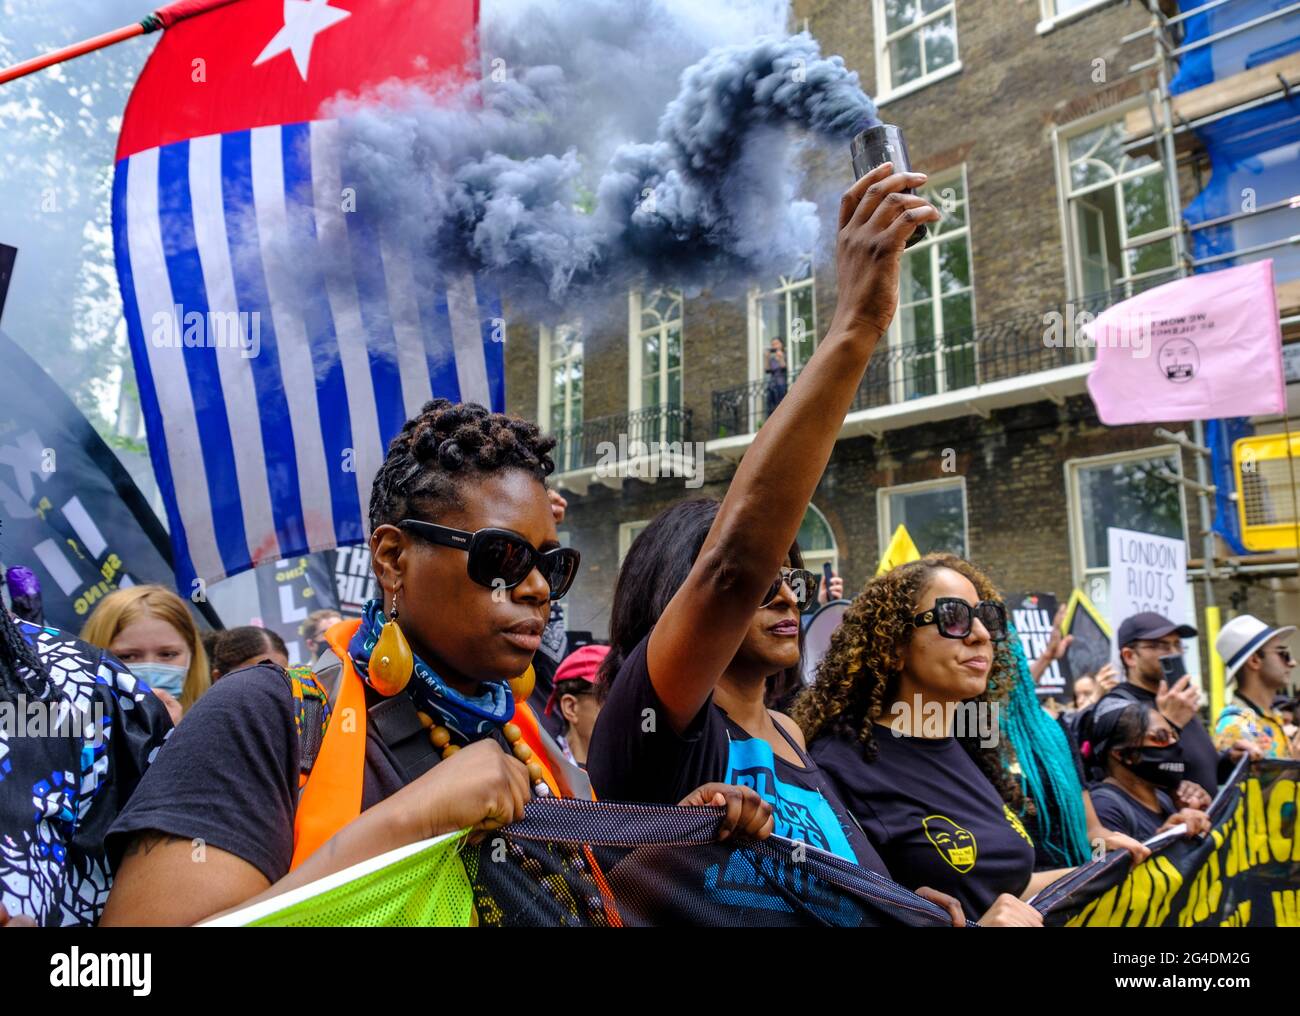 Black lives Matter protesting along side Kill the Bill demonstration. led by the UK branch of United for Black Lives specifically fighting against the use of police power as a means of silencing black voices, in response to recent killings of black people by the police. Stock Photo